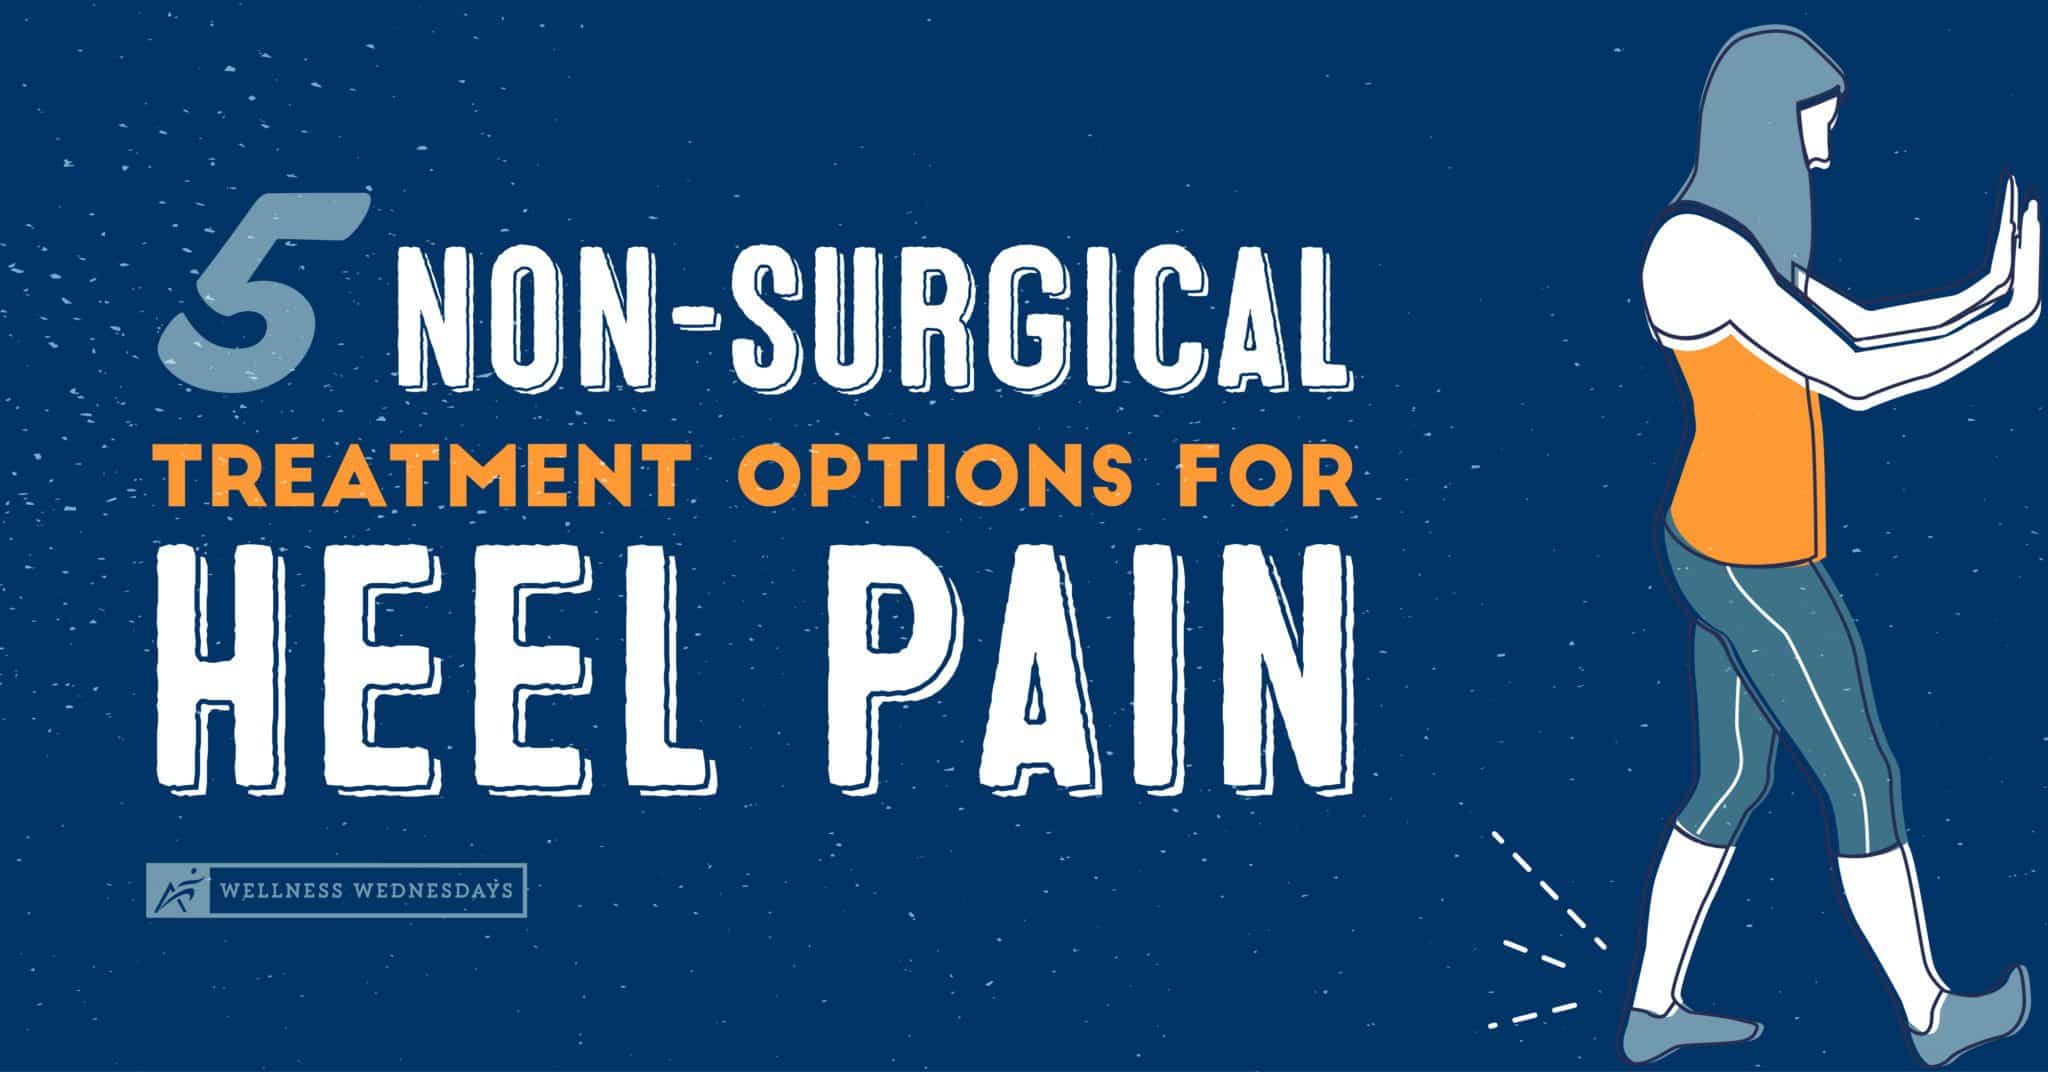 5 non-surgical treat,emt options for heel pain